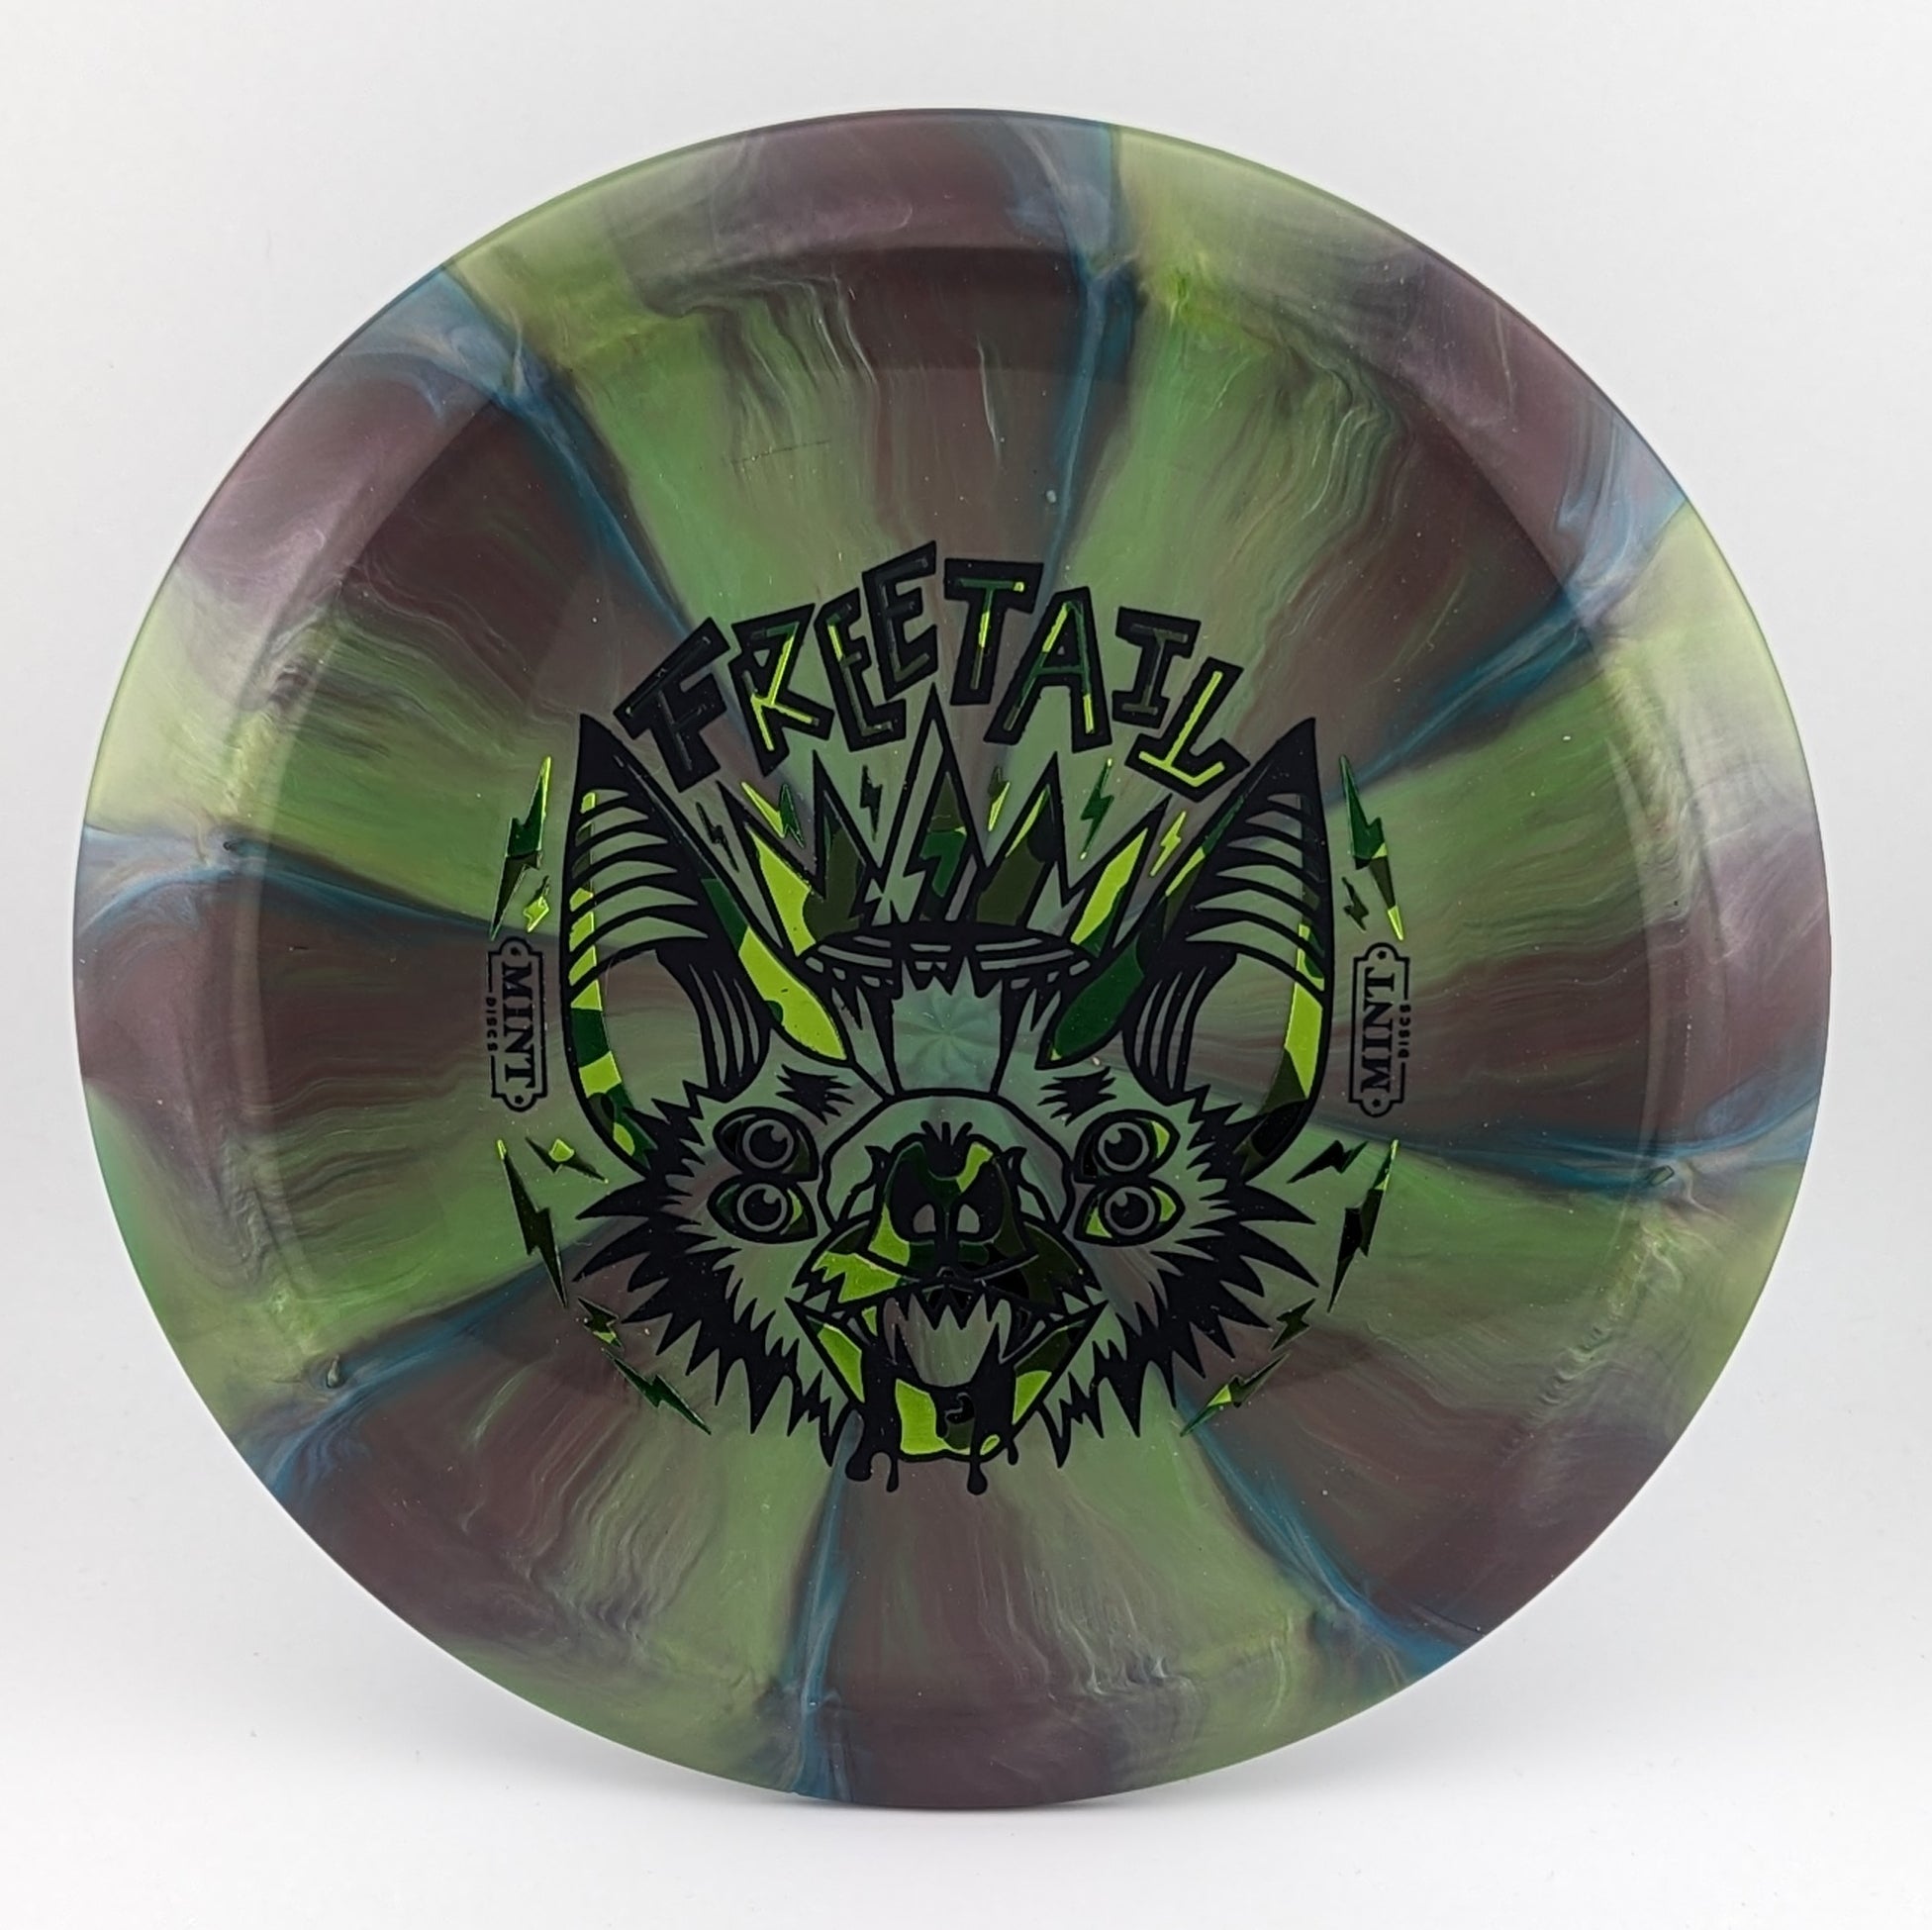 Mint Discs Swirly Sublime Freetail